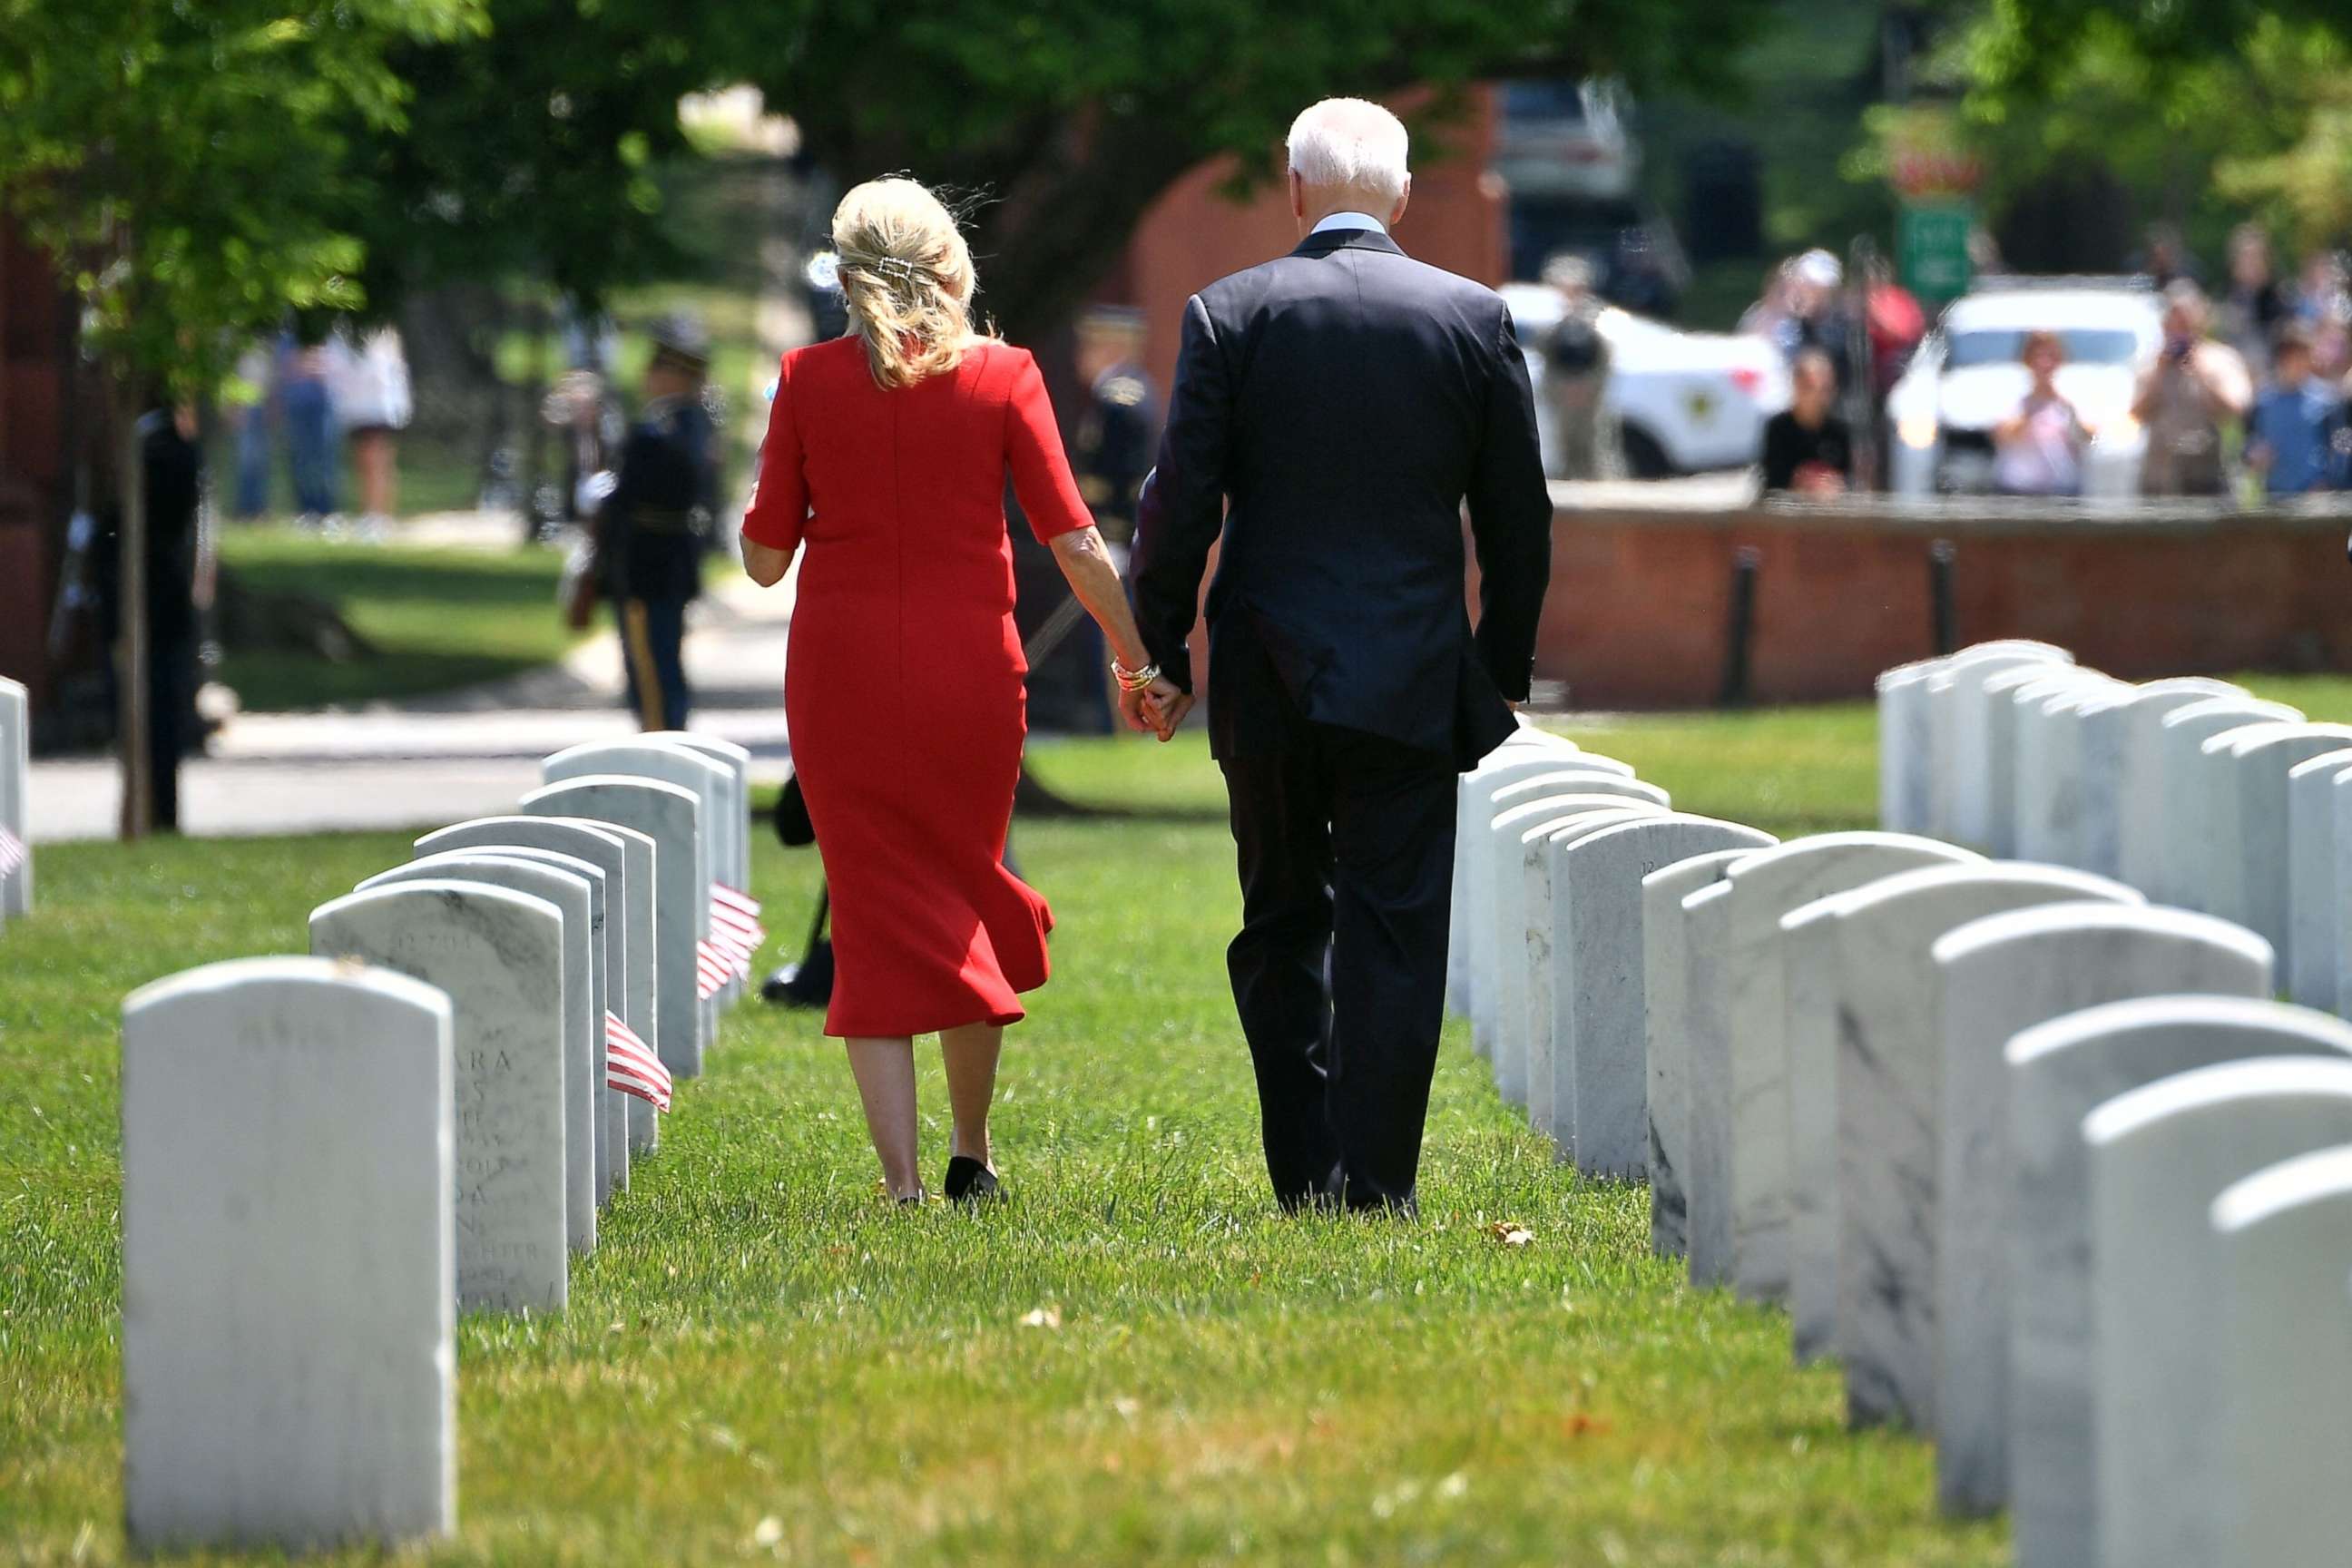 PHOTO: President Joe Biden and first lady Jill Biden return to their vehicle after the 153rd National Memorial Day Observance in Arlington National Cemetery on Memorial Day in Arlington, Va. on May 31, 2021.